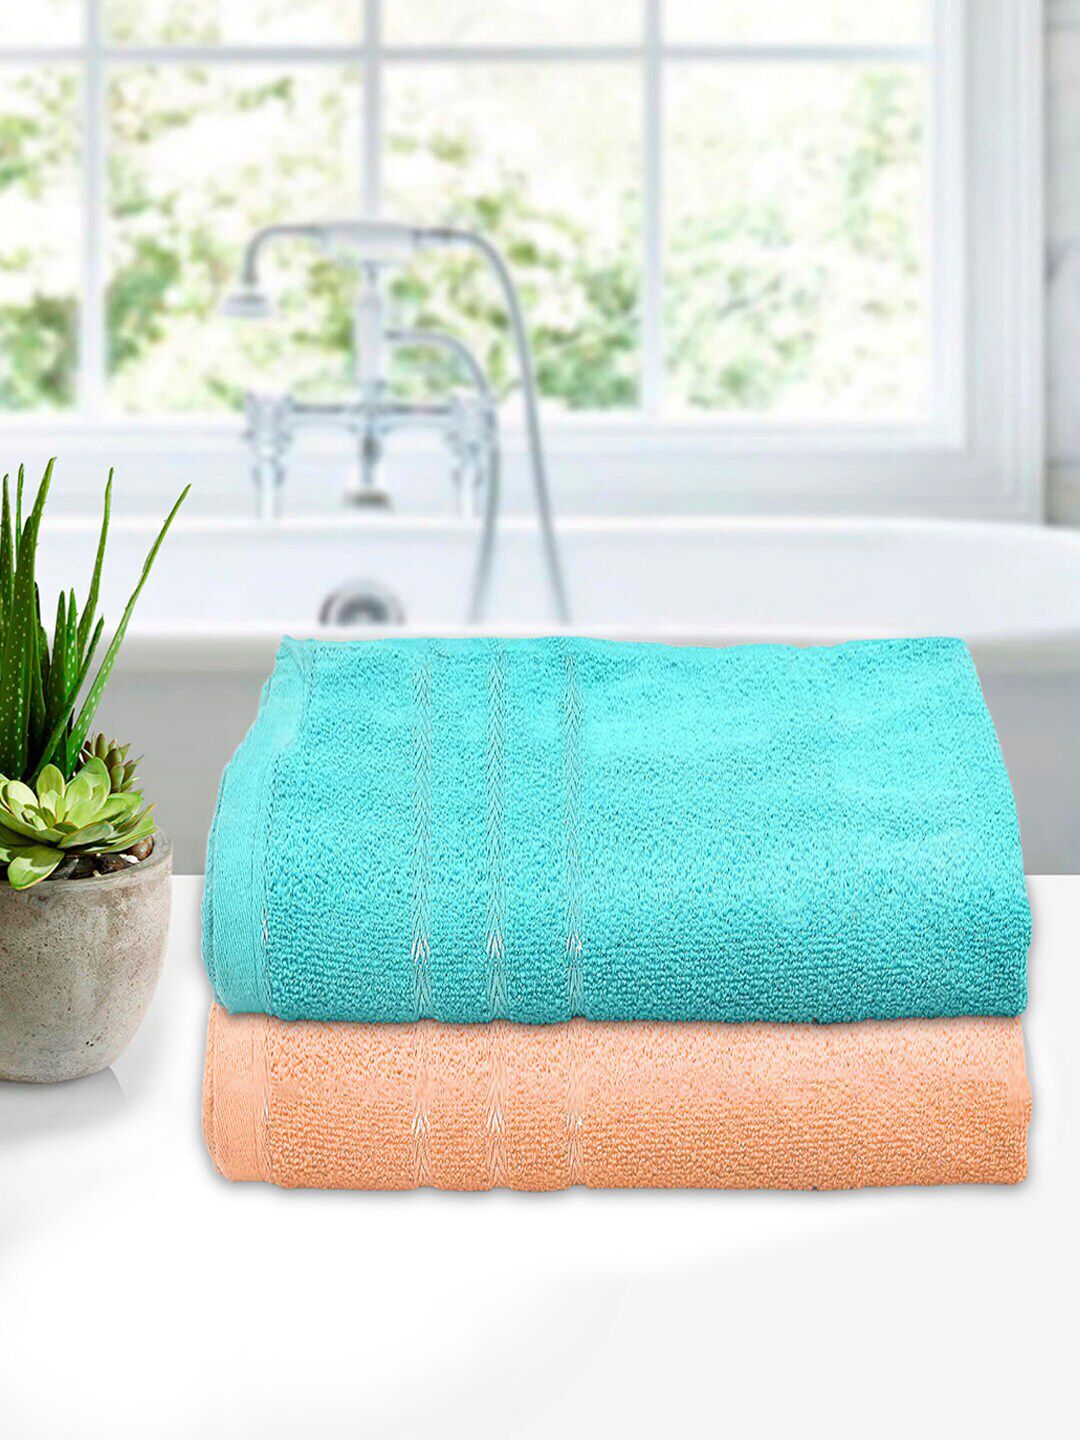 Kuber Industries Unisex Kids Set of 2 Blue & Peach Colored Solid 210 GSM Soft Cotton Bath Towels Price in India